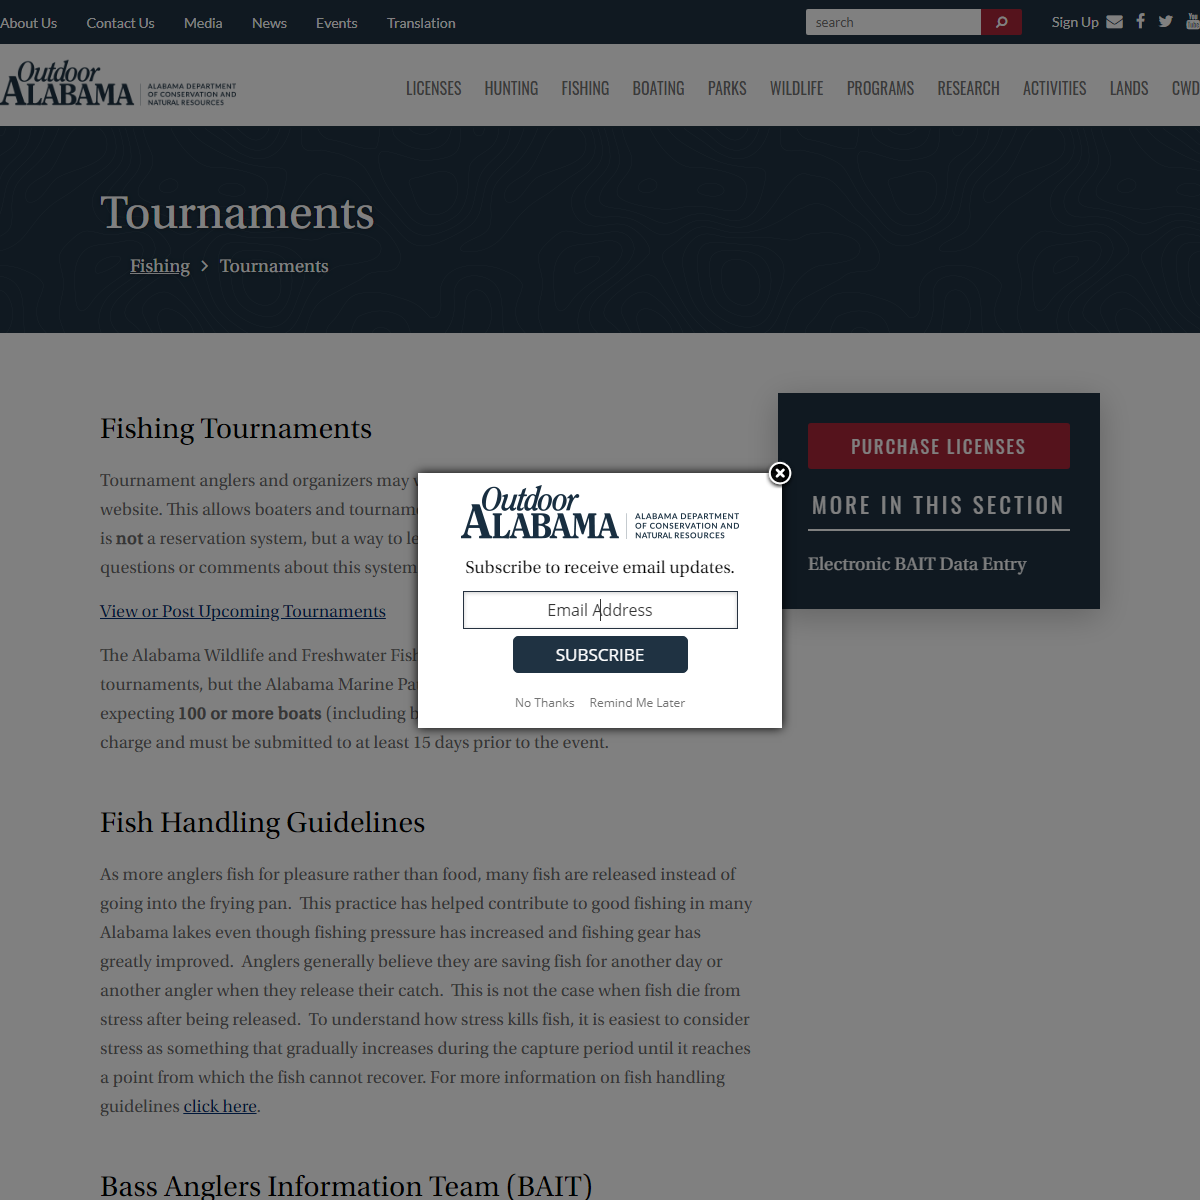 A complete backup of https://www.outdooralabama.com/fishing/tournaments